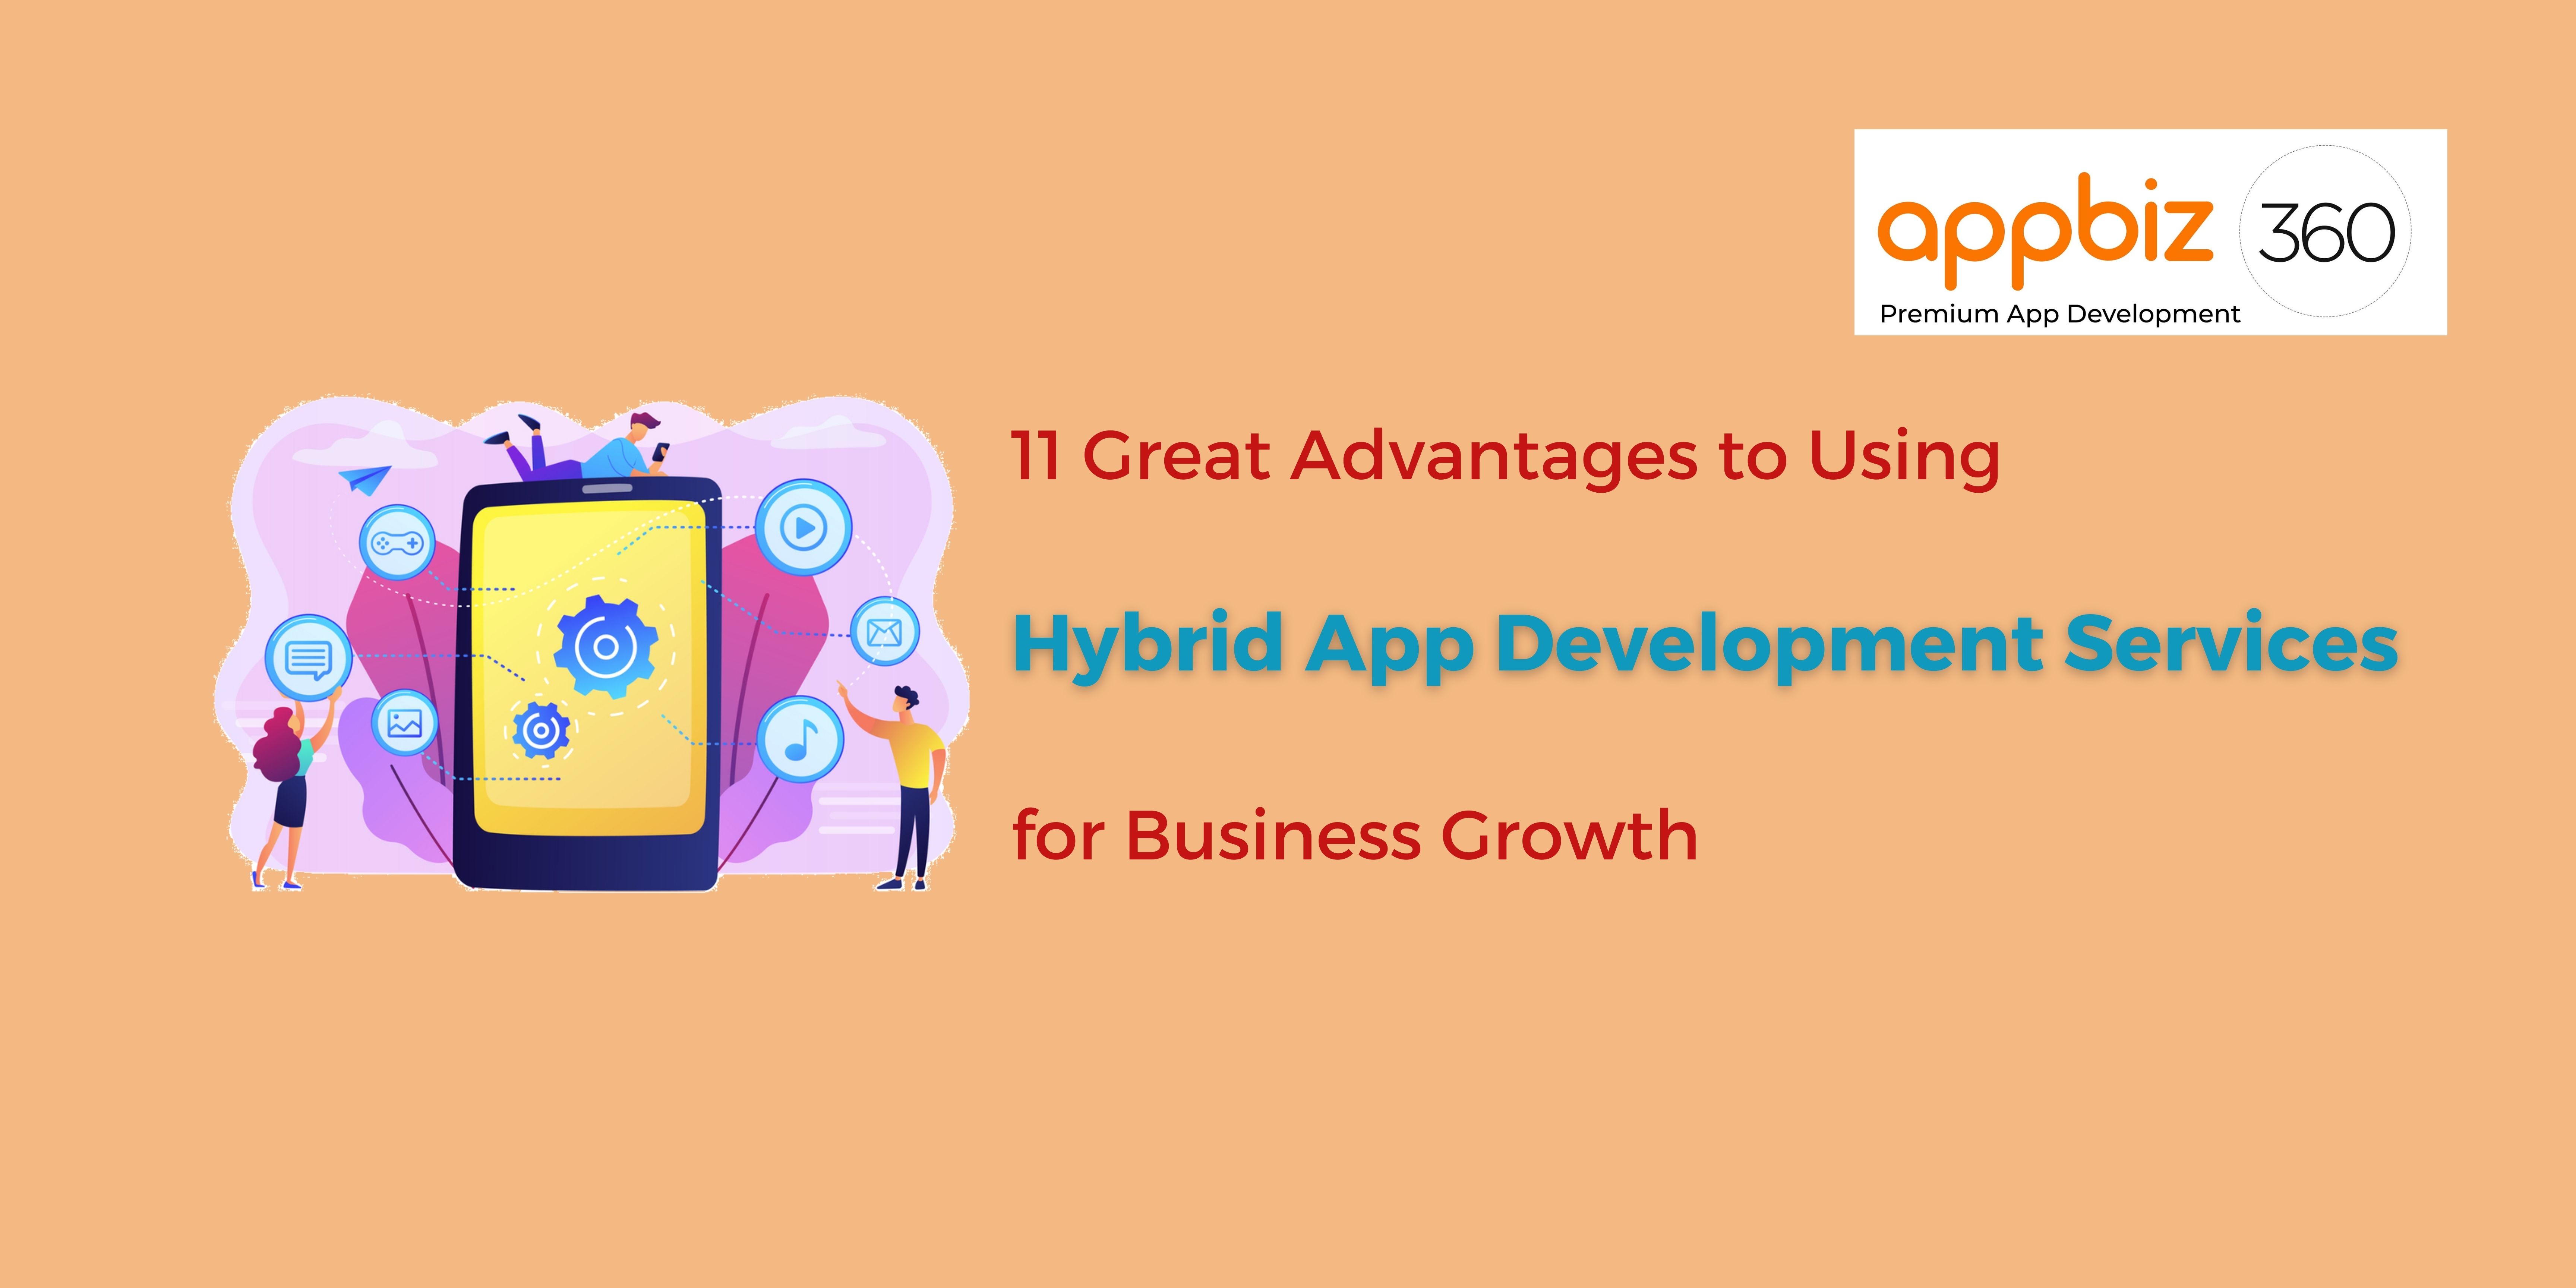 11 Great Advantages to Using Hybrid App Development Services for Business Growth